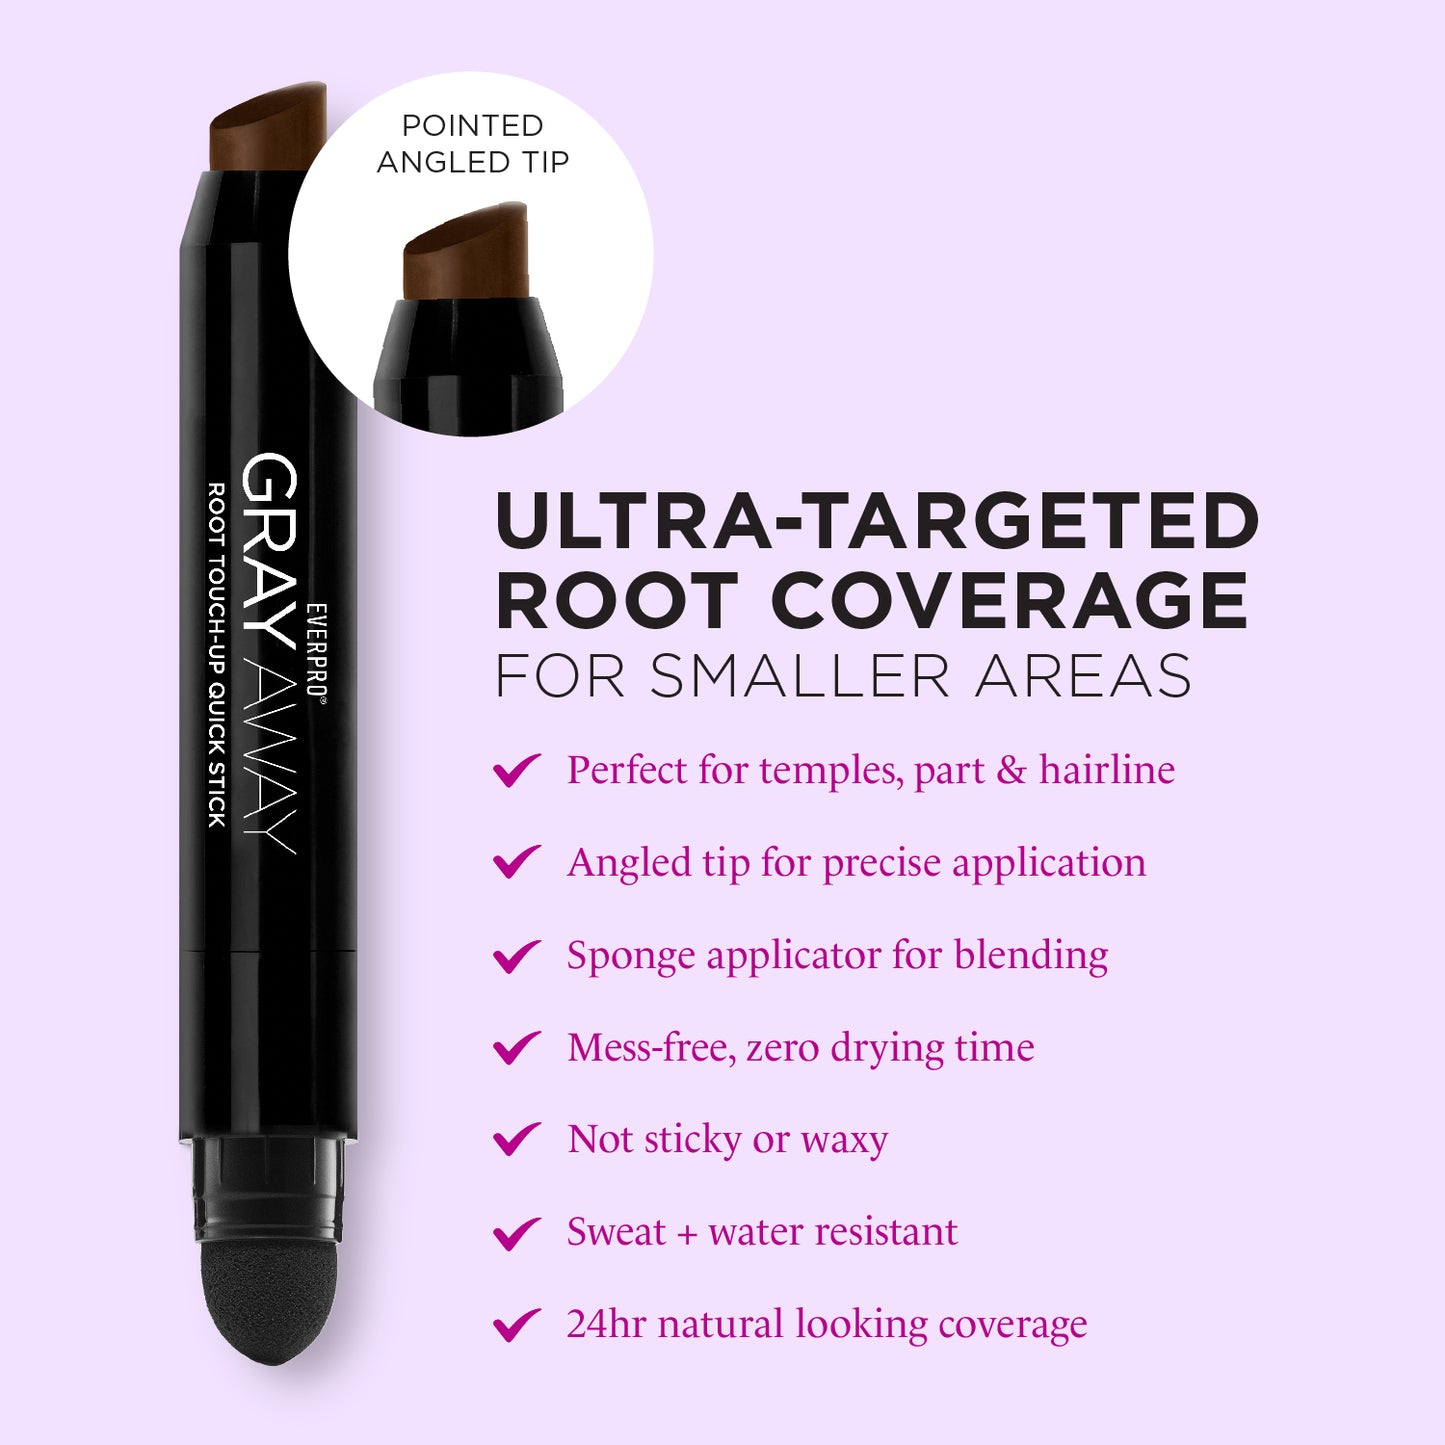 Root Touch-Up Quick Stick